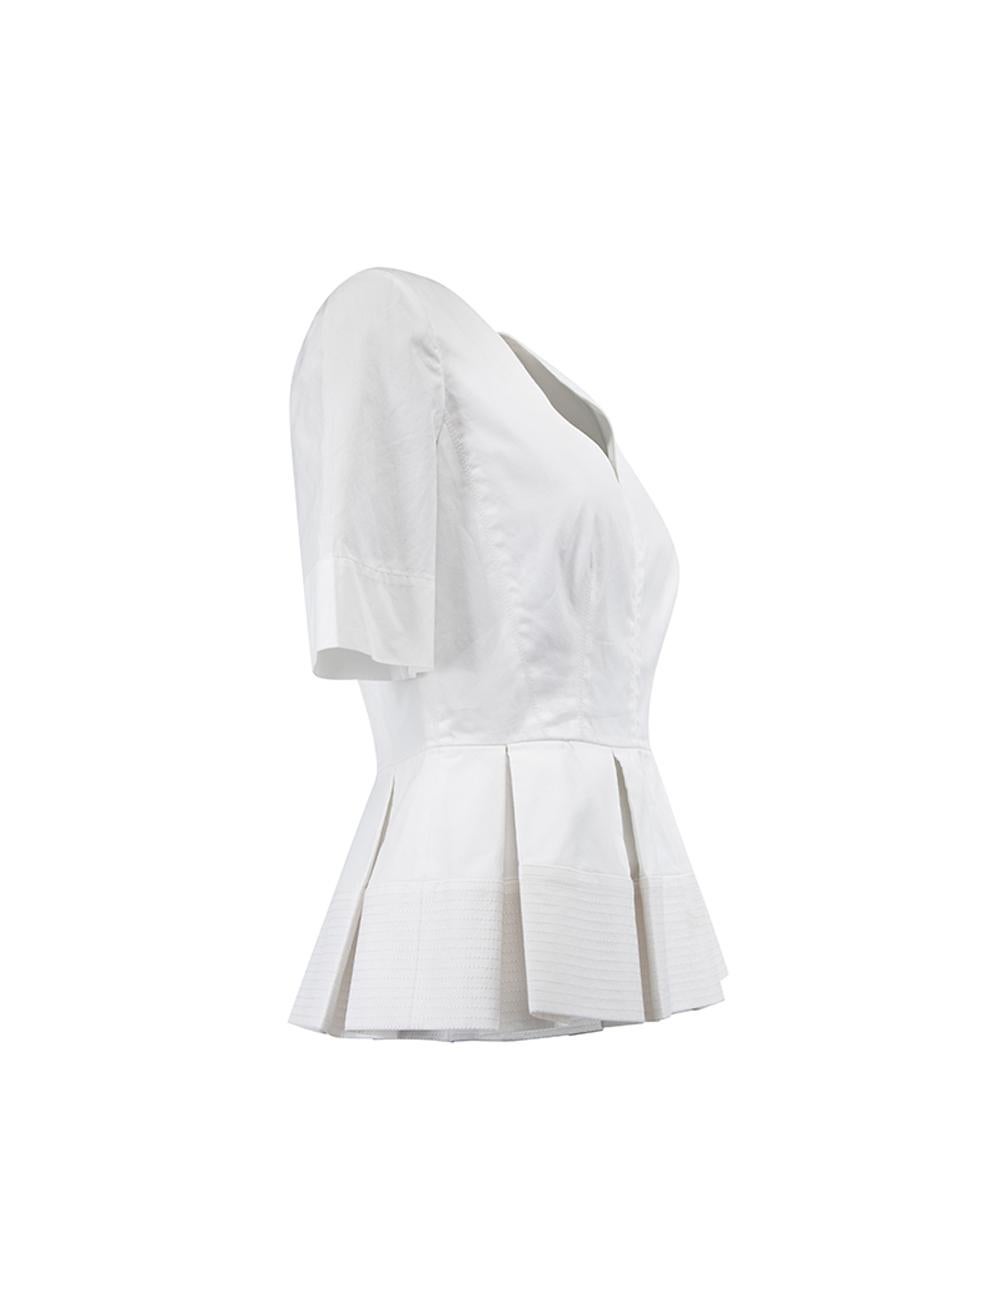 CONDITION is Very Good. Minor make up stain on the waist lining from try-on of top is evident on this used Balenciaga designer resale item. Details 2015 White Cotton Short sleeves top Pleated peplum hemline V neckline Back zip closure with hook and